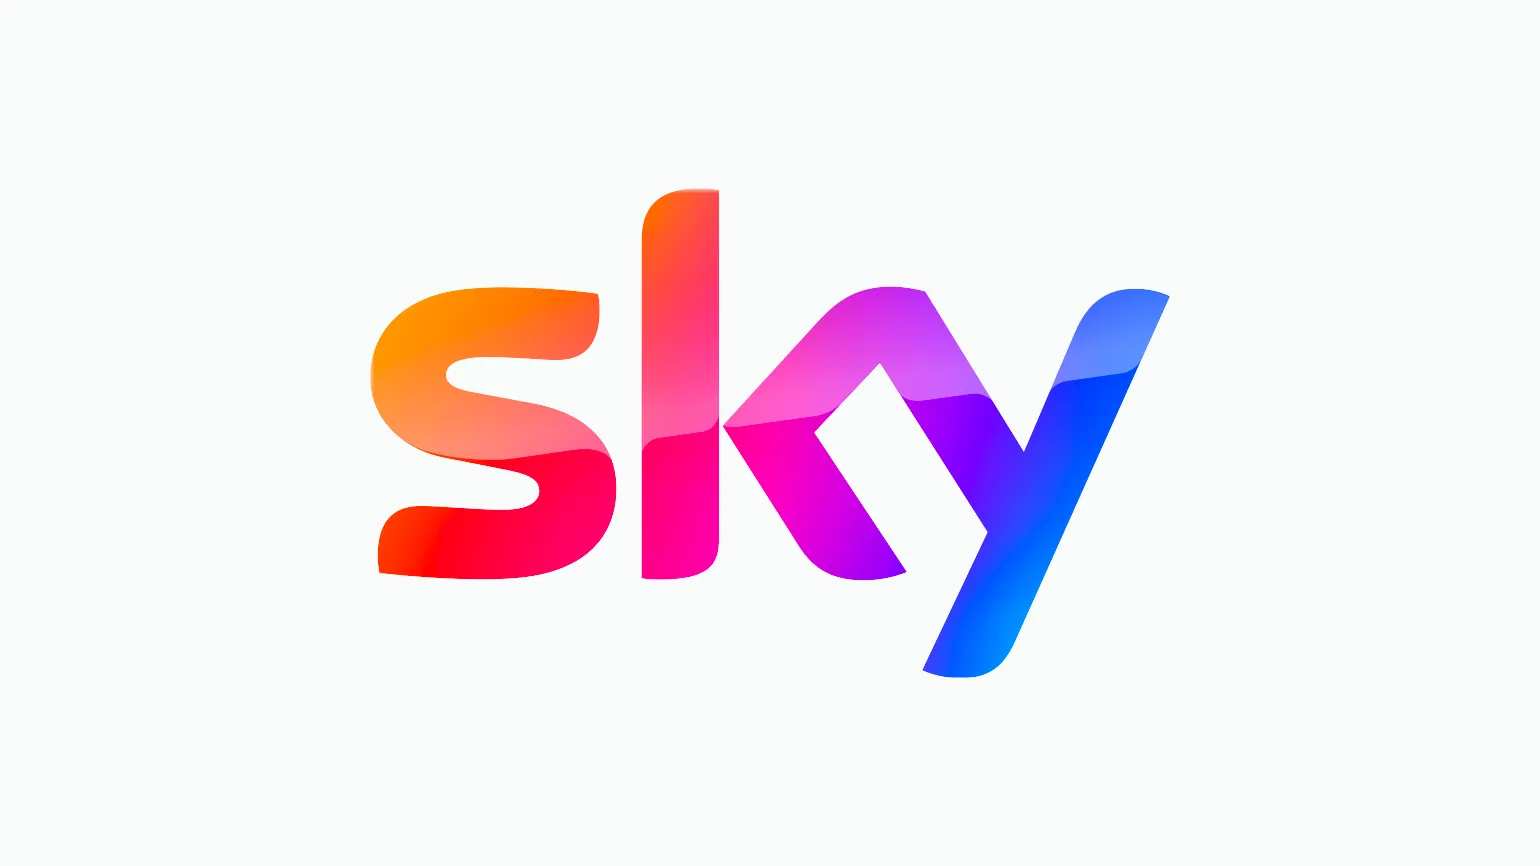 Upgrading your phone early with Sky Mobile